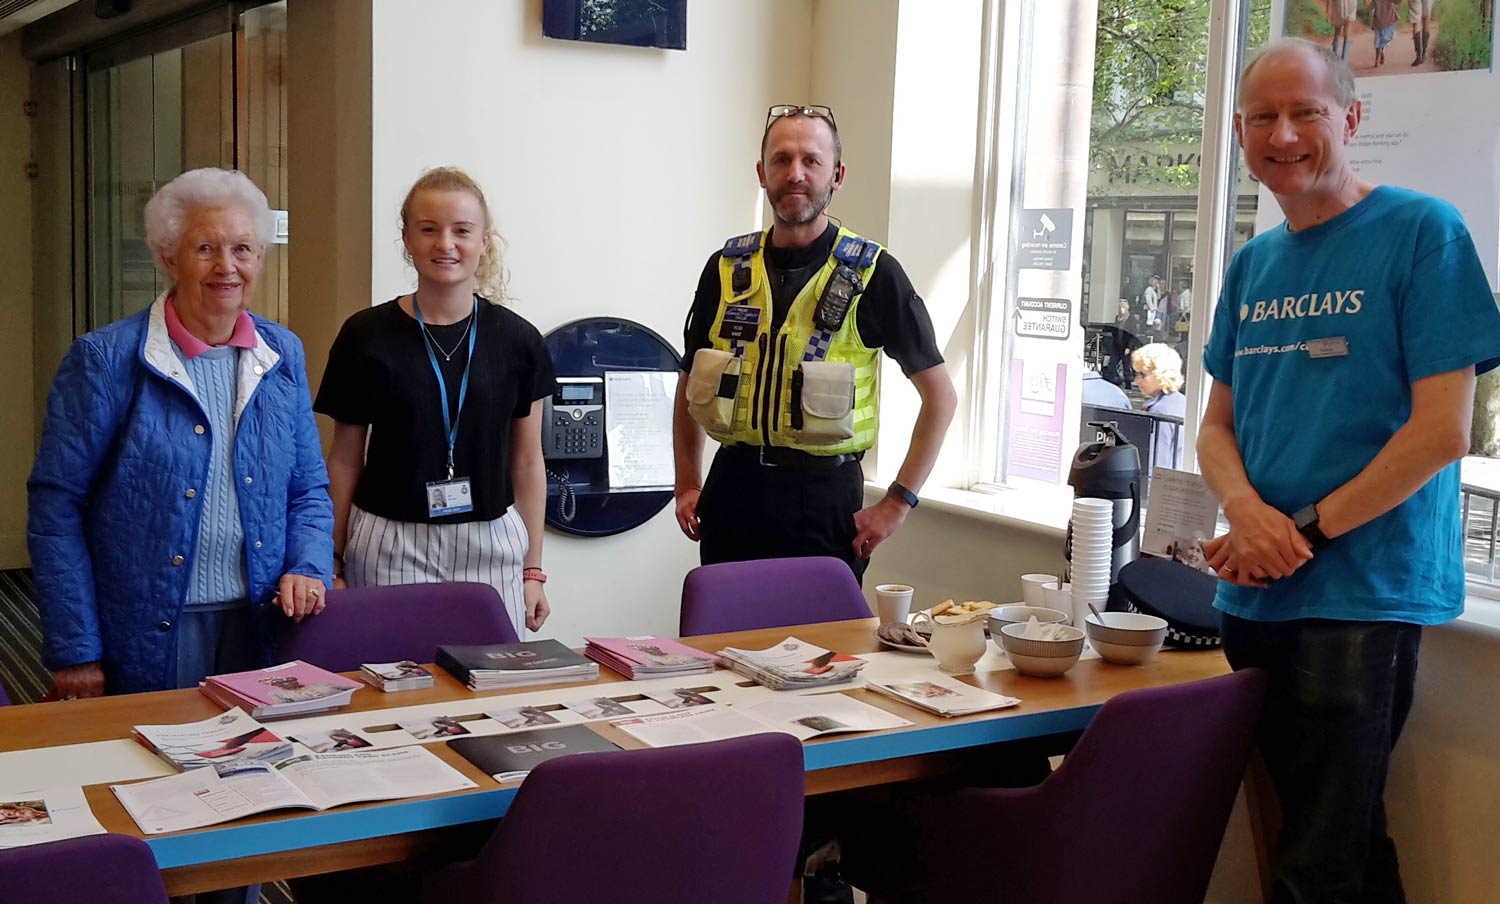 Police Community Support Officer Julian Ward of York's Safer Neighbourhood Team and Ella Jessop of North Yorkshire Police's Economic Crime Unit join forces with staff at Barclays Bank to provide customers with fraud prevention advice